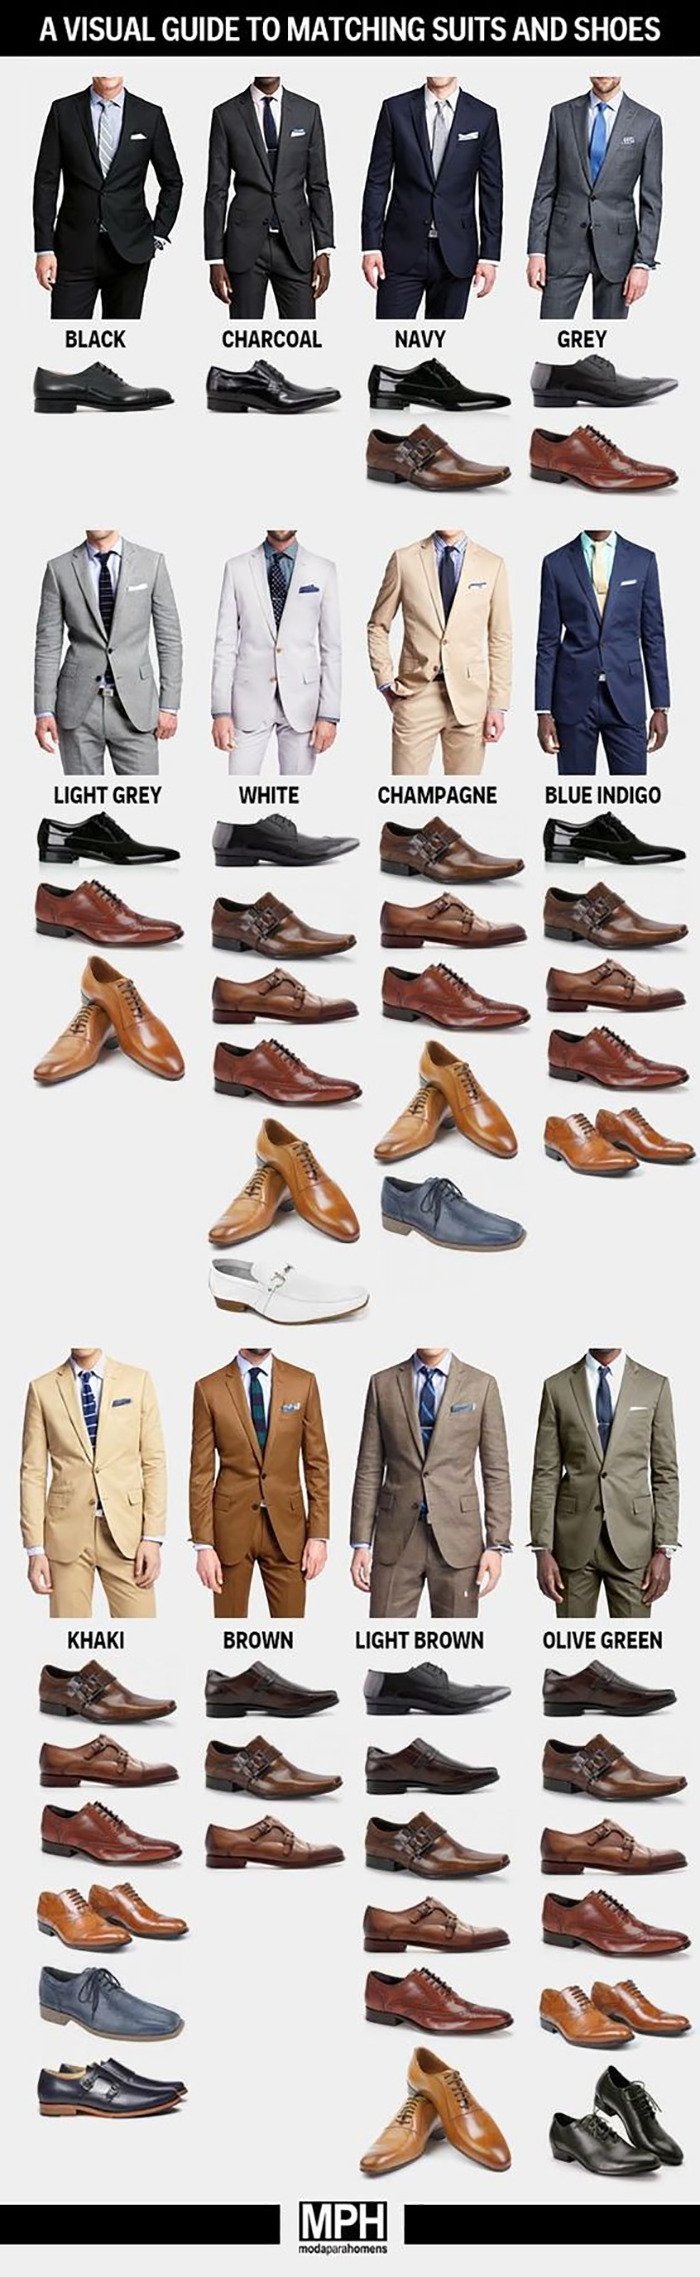 What Suits And Shoes Go Together